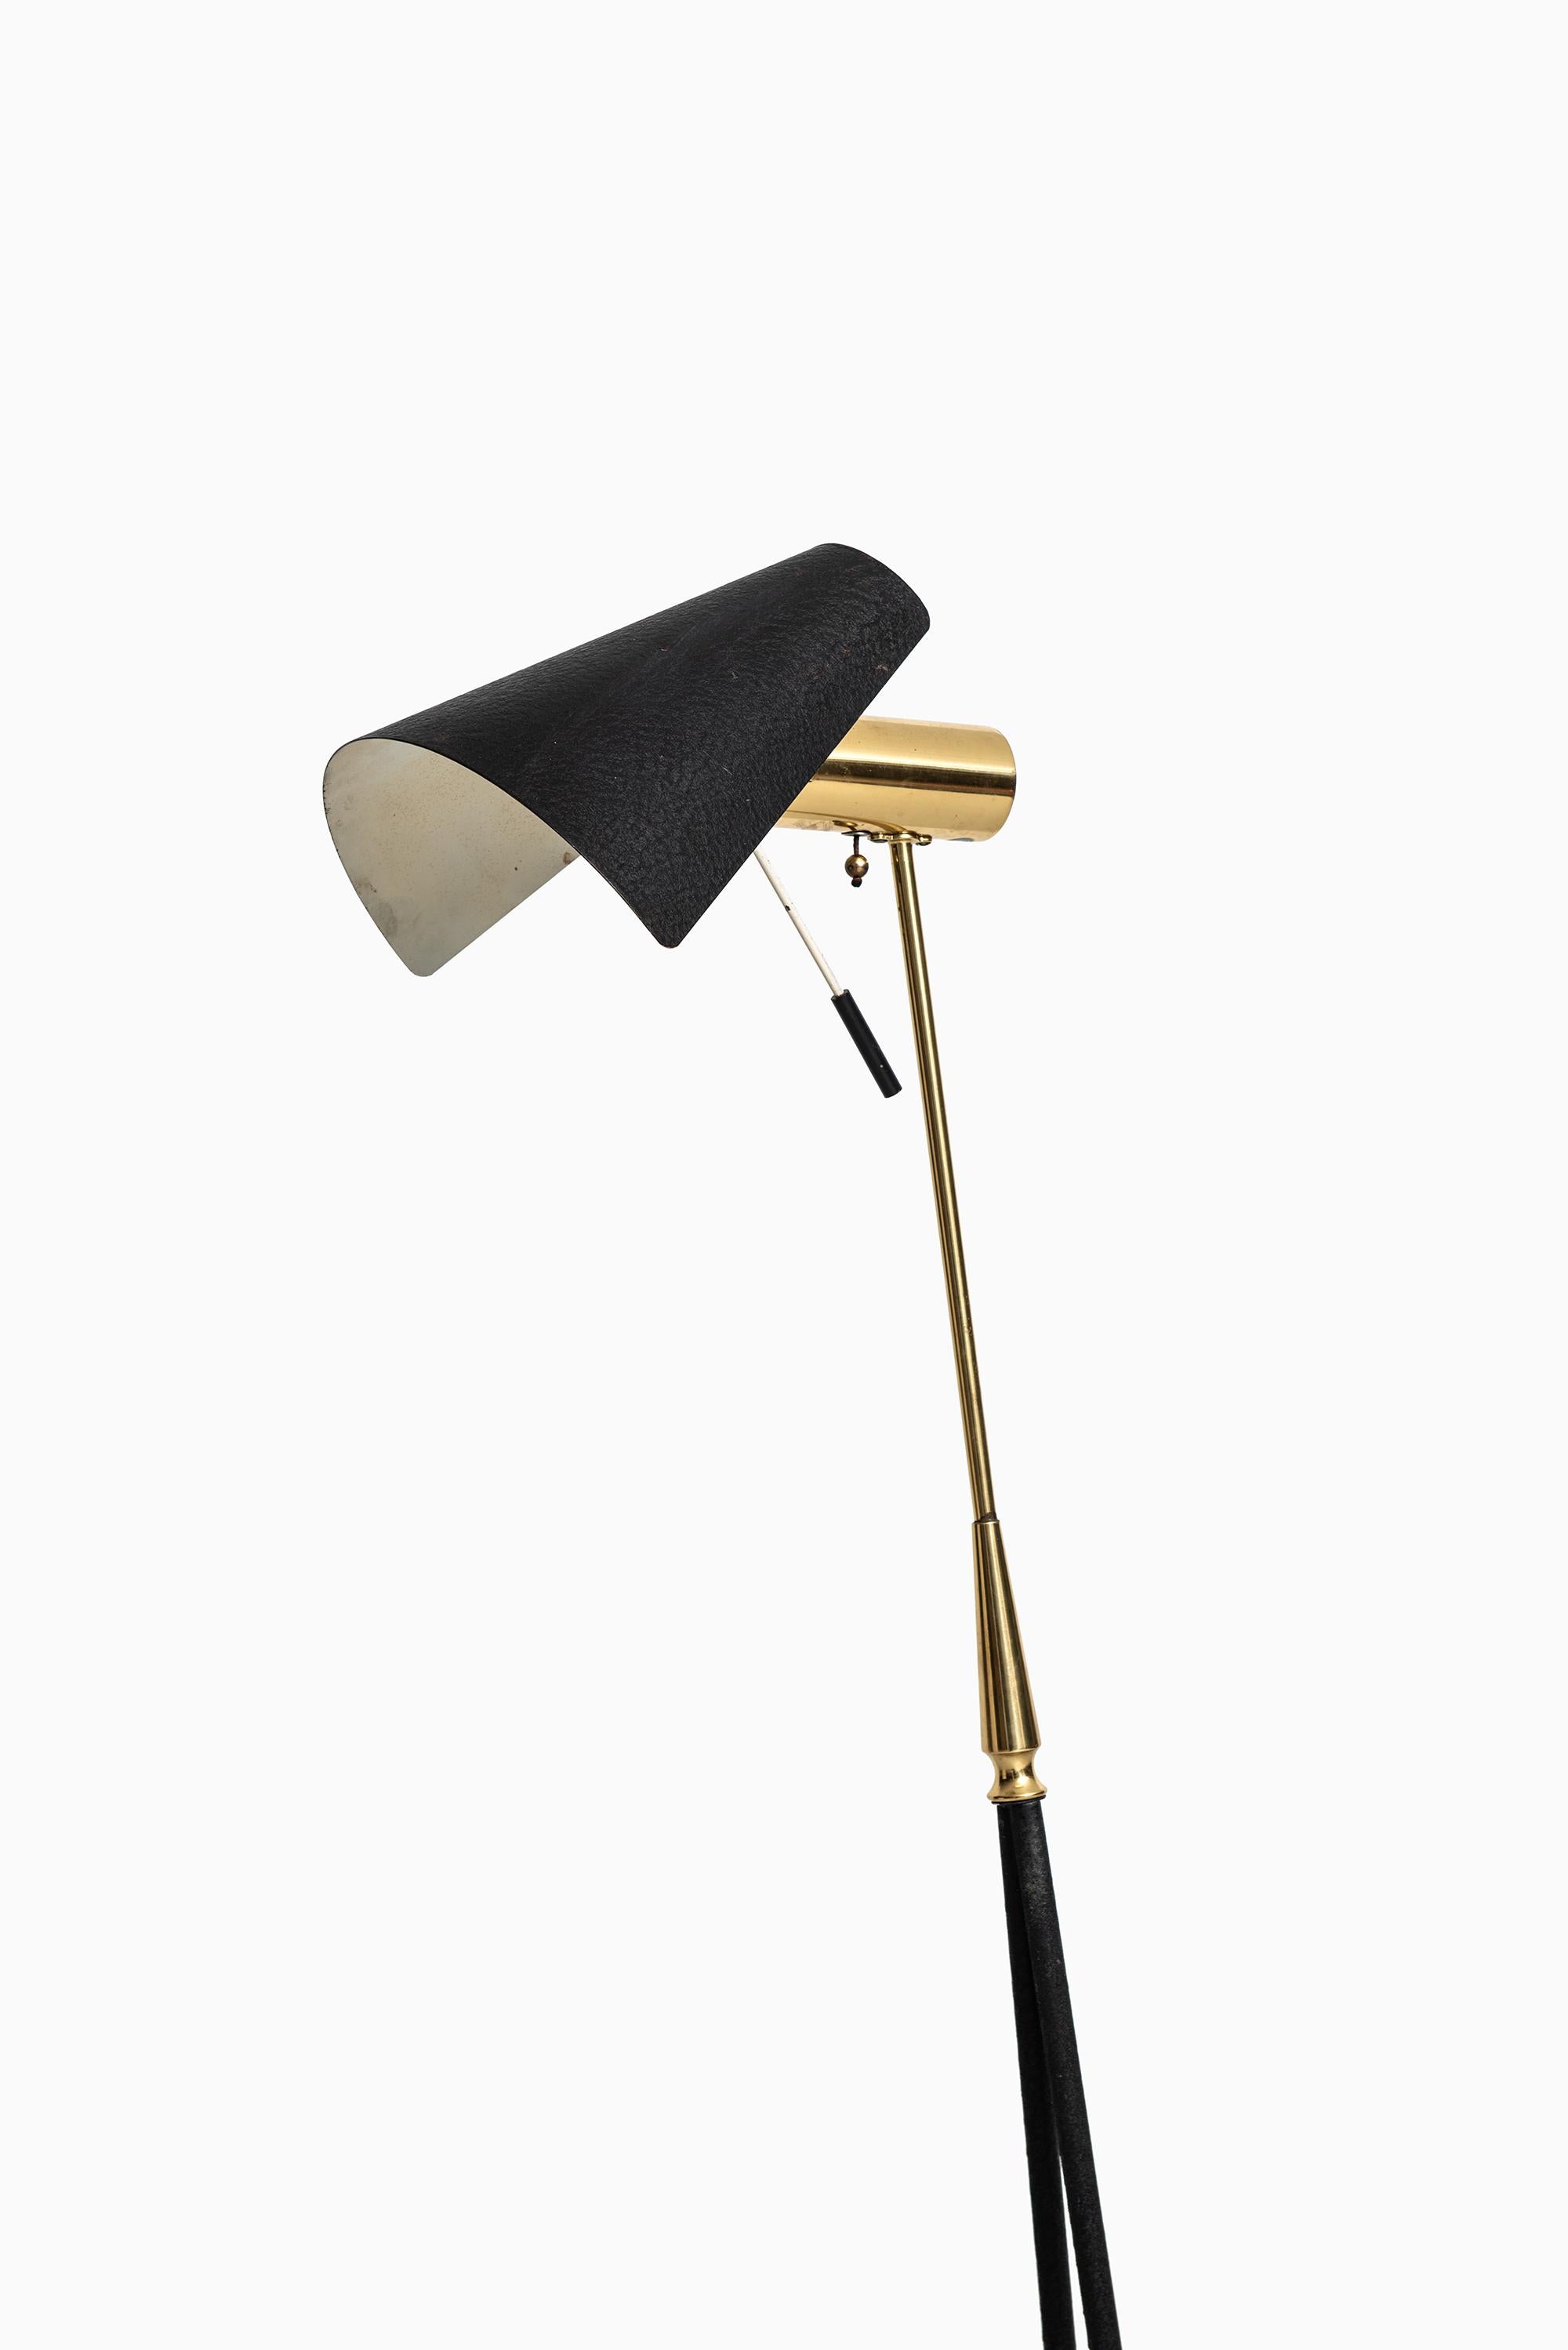 Rare floor lamp with adjustable shade. Produced by Falkenbergs belysnings in Sweden.